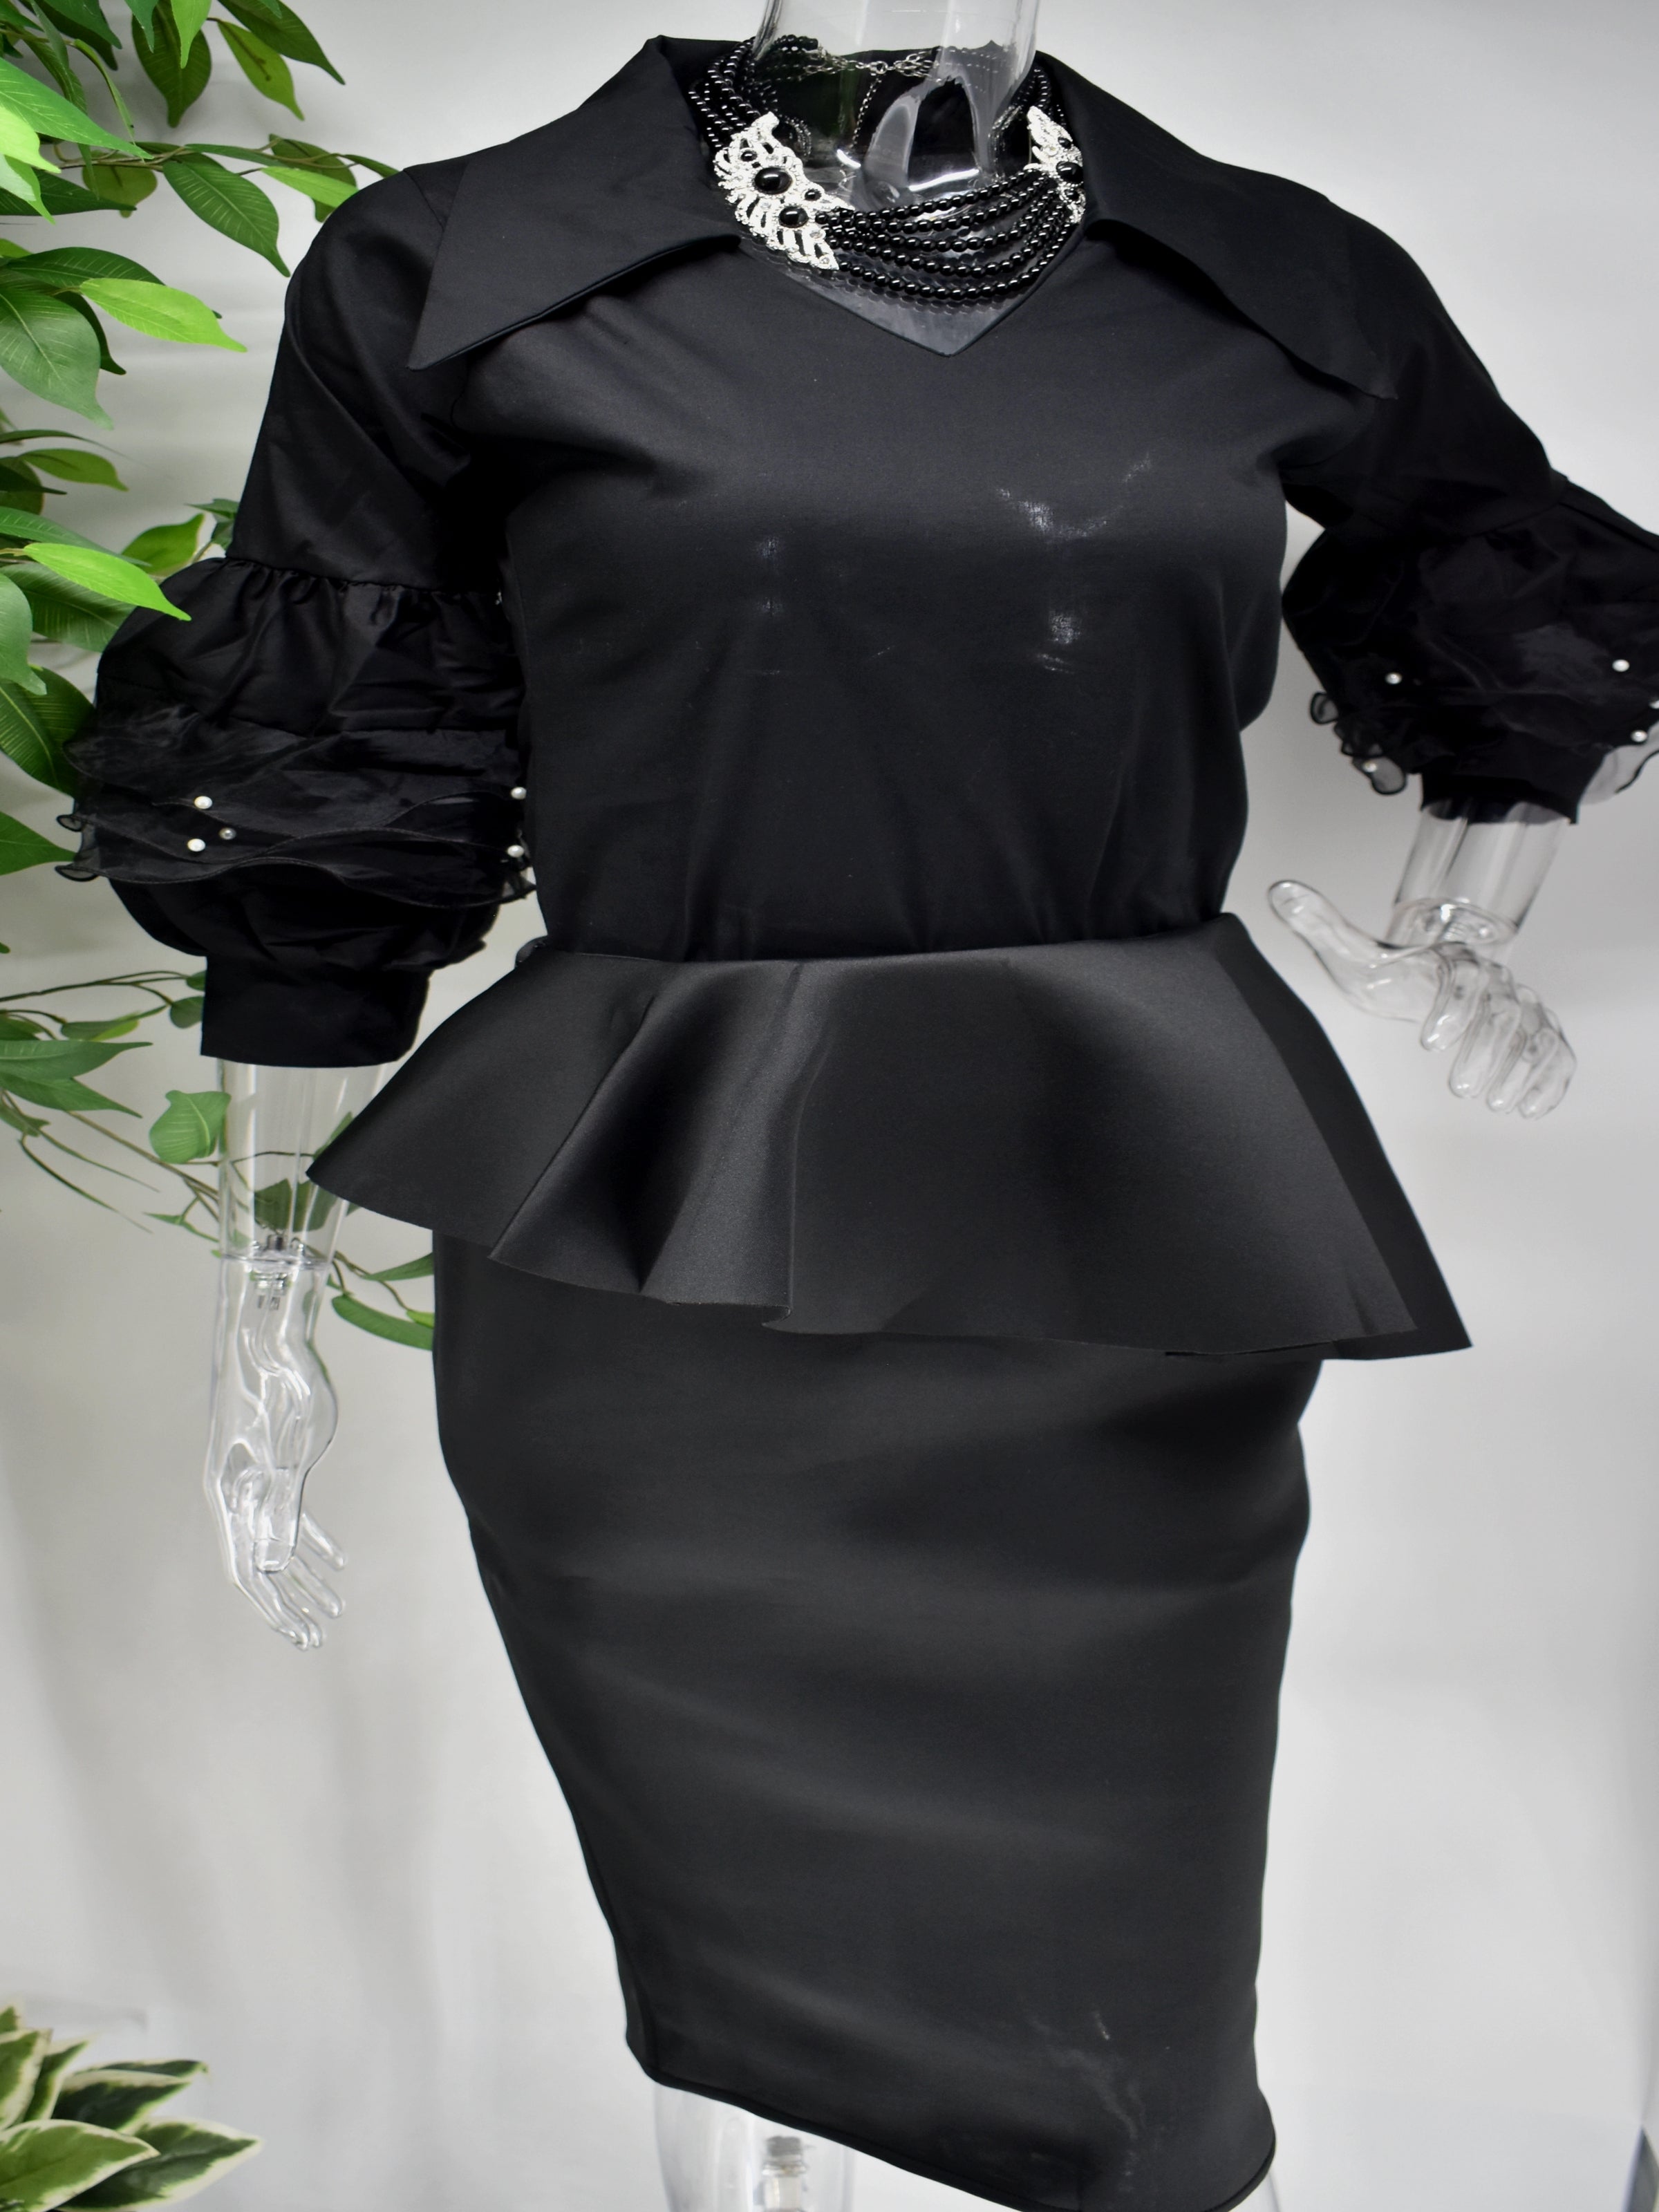 You can never do wrong in our Belita Shirt top.  Our Belita shirt top is black with an edgy collar and v neckline.  The beauty is in those sleeves which run into a ballon sleeve piped with lace and accented with pearls.